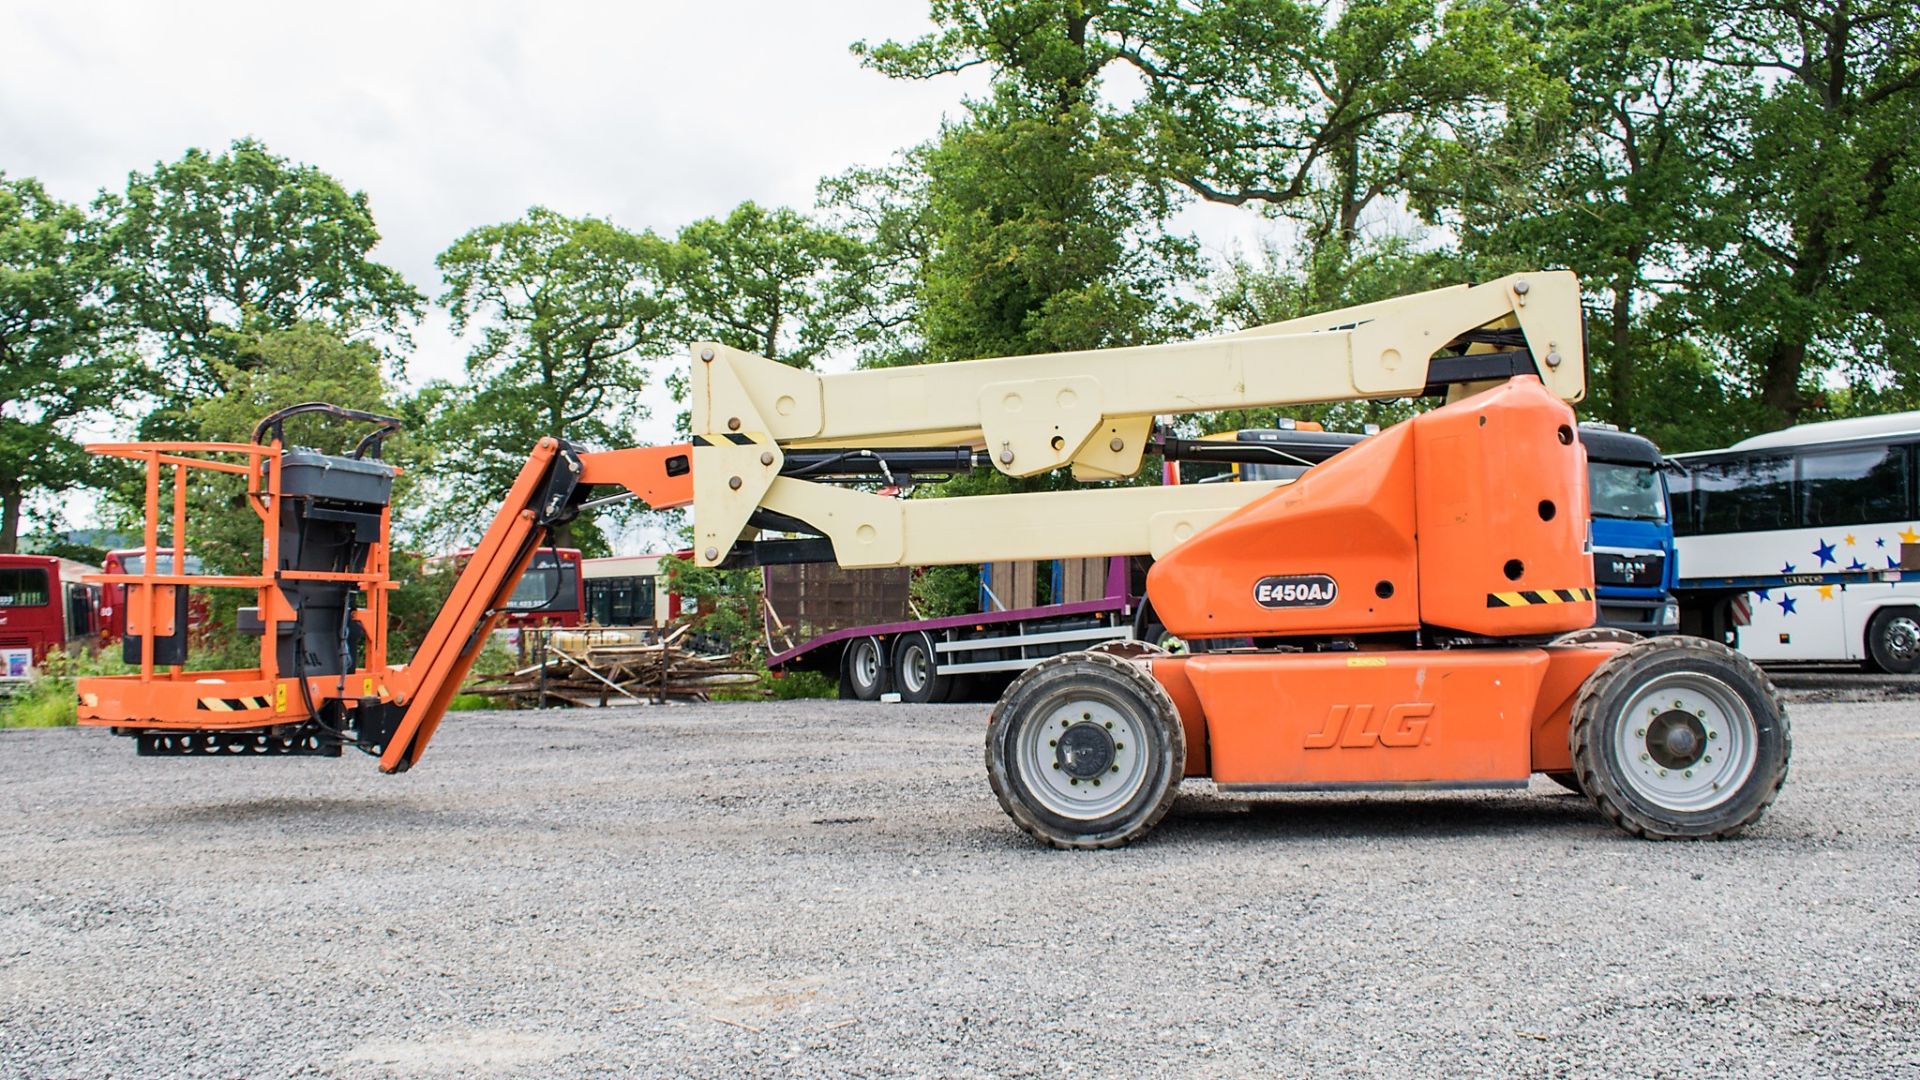 JLG E450AJ battery electric articulated boom access platform Year: 2014 S/N: 189435 Recorded - Image 7 of 18